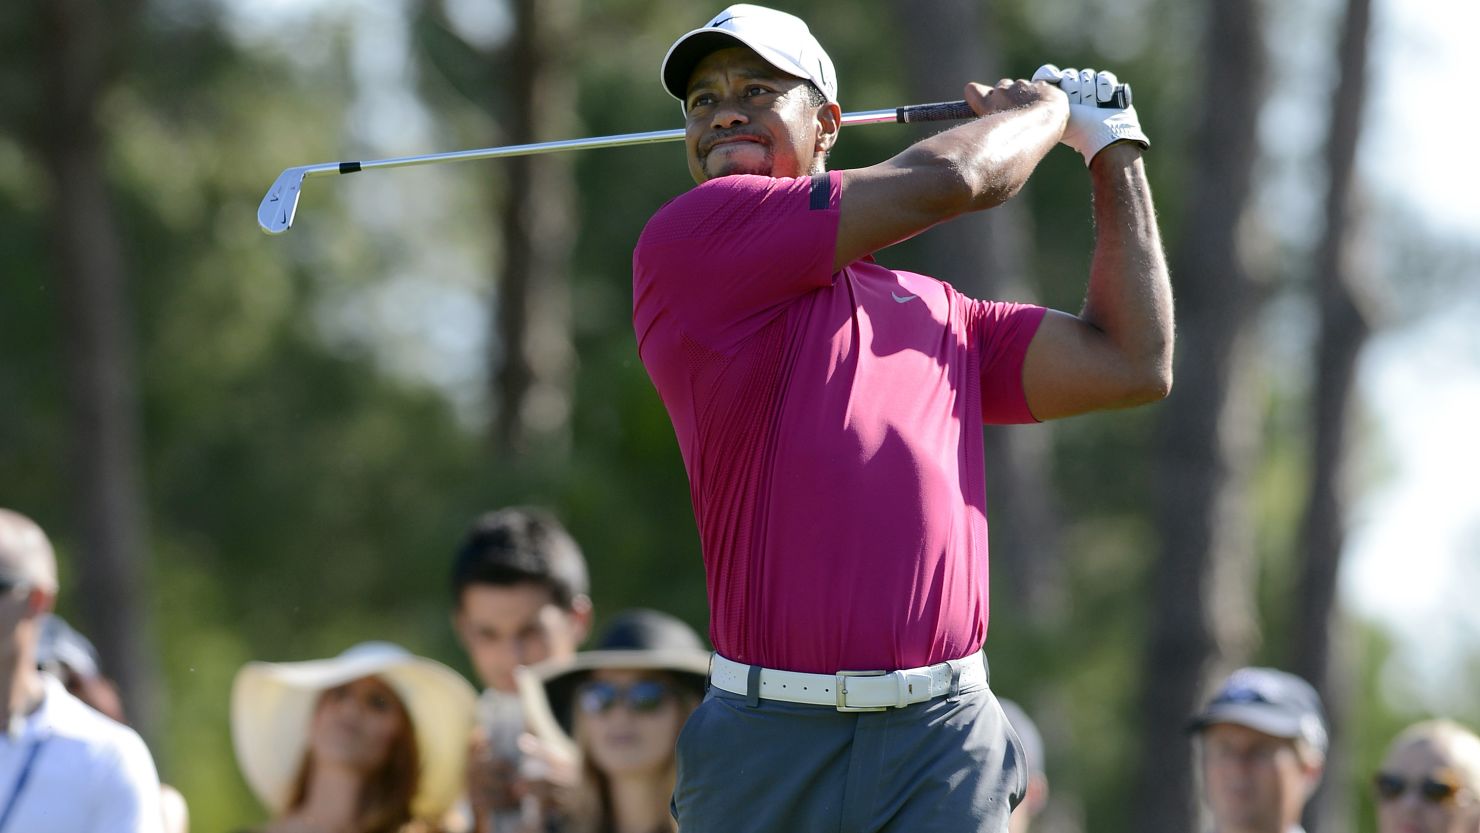 Tiger Woods is six shots off the pace in Turkey after a third round 68 on Saturday.